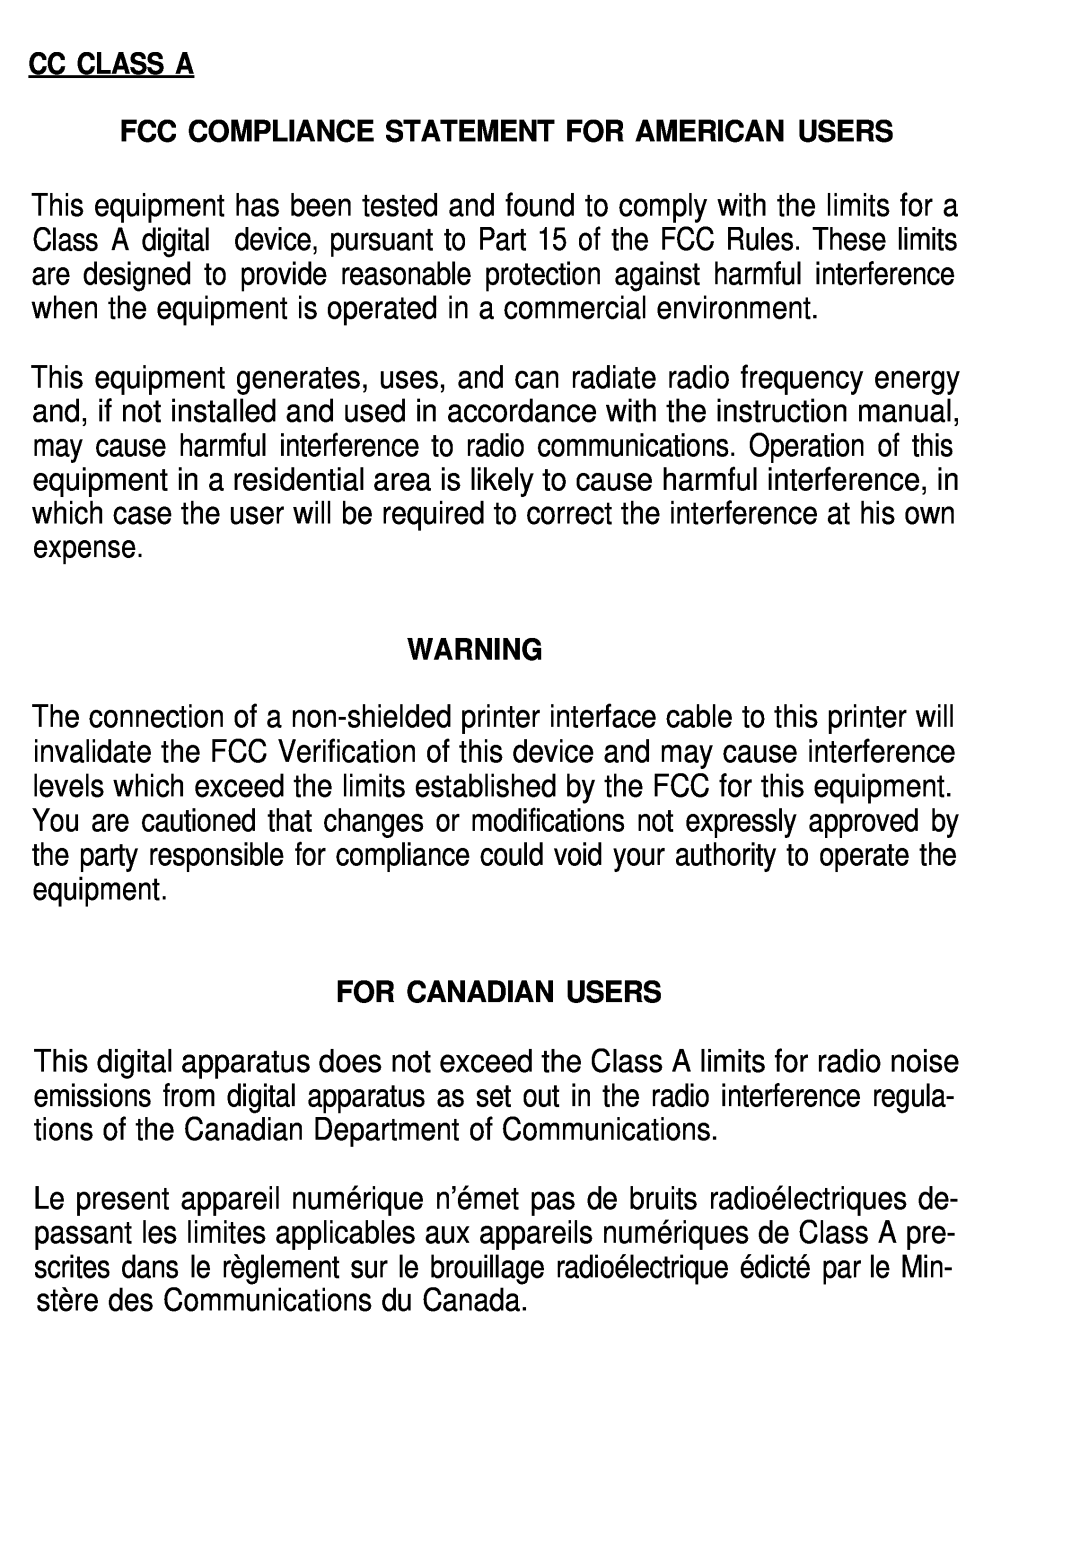 Seiko Group TM-L60 manual Cc Class A Fcc Compliance Statement For American Users, For Canadian Users 